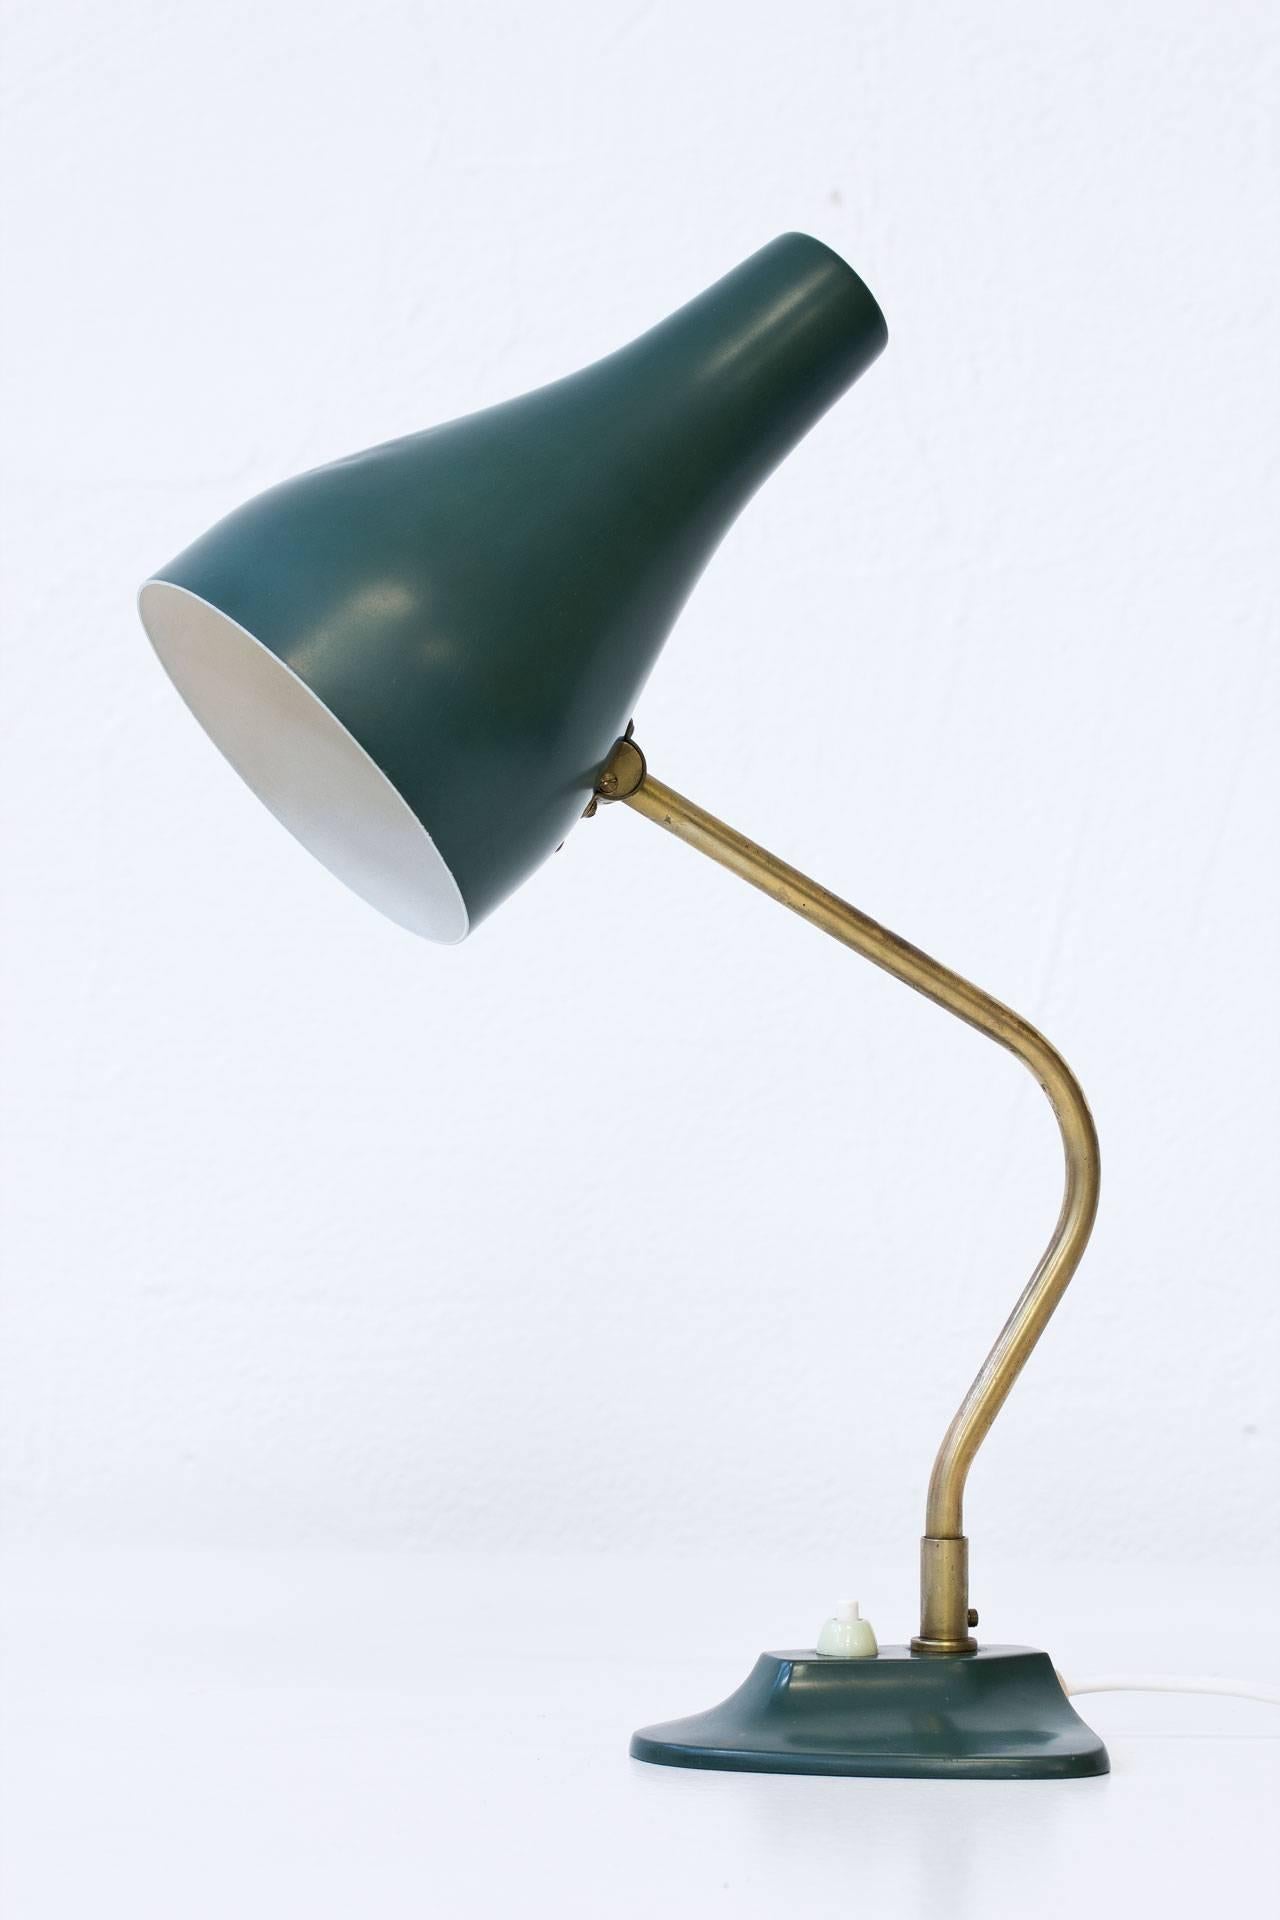 Swedish table lamp produced by ASEA during the 1950s. Brass stem with diffuser and
base in green painted metal. Adjustable shade and axis.